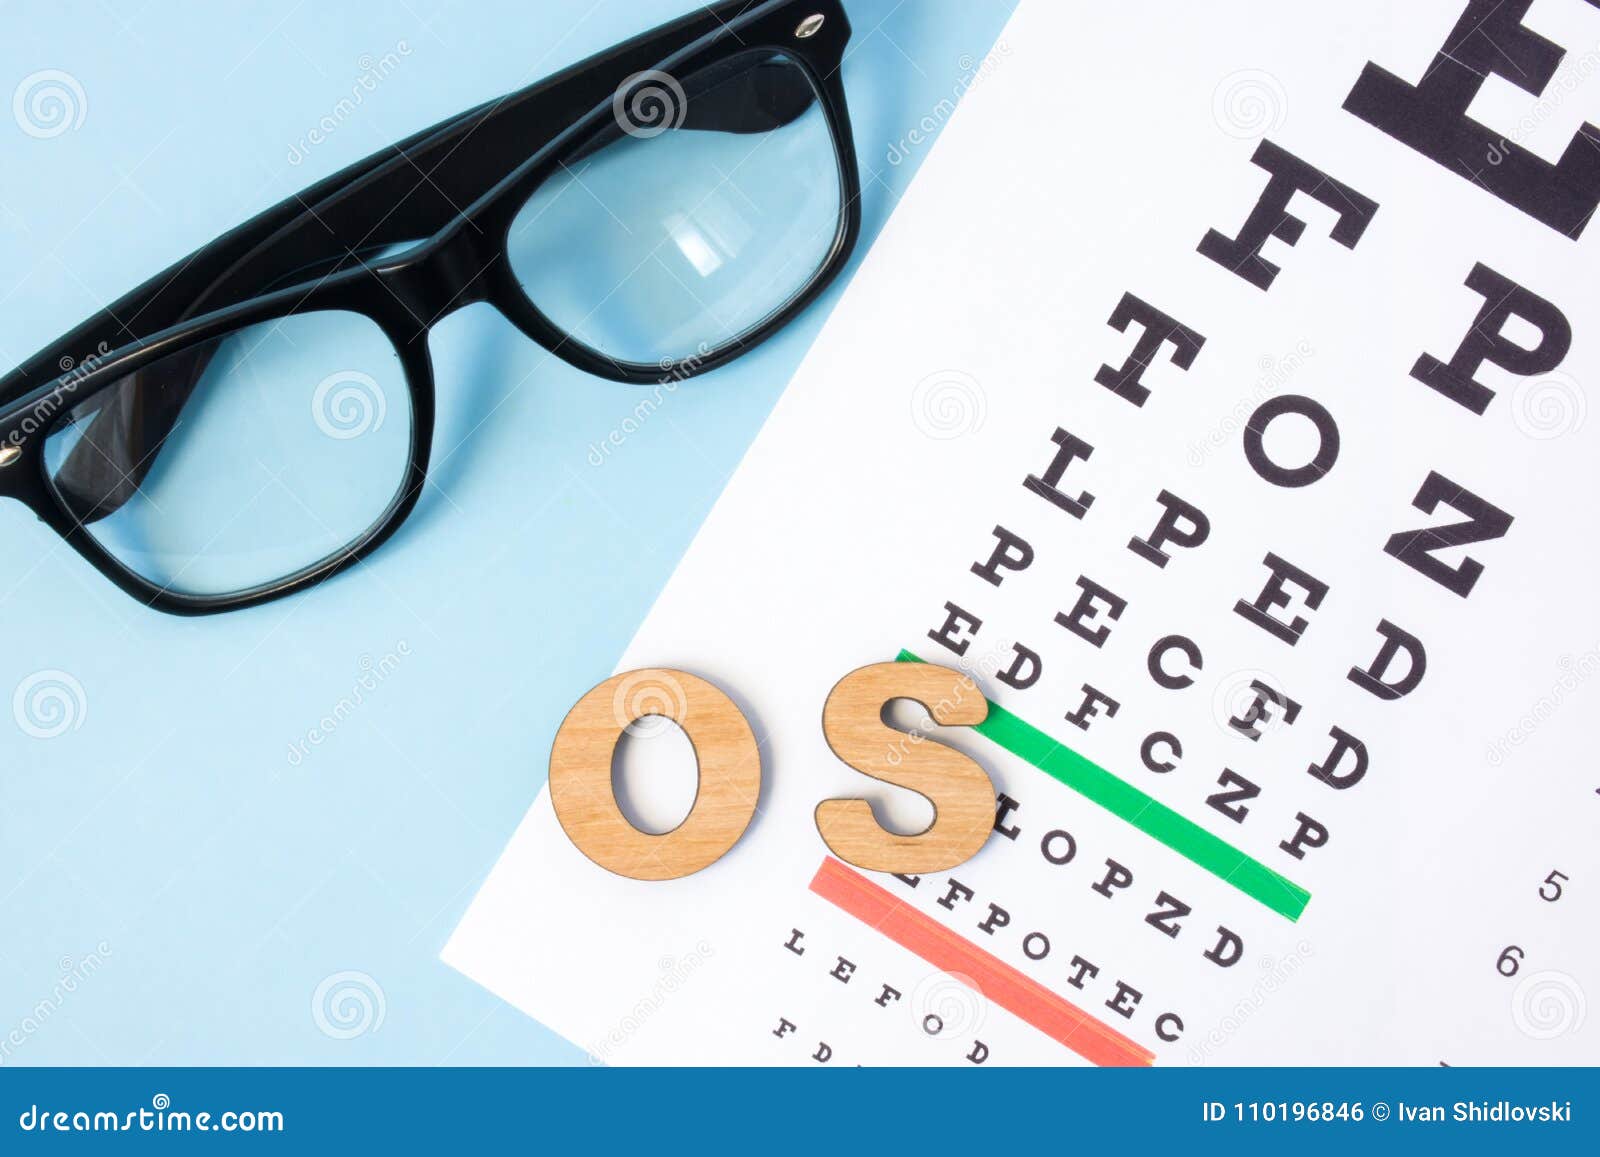 abbreviation os oculus sinistra in ophthalmology and optometry in latin, means left eye. examination, treatment, or selection of l